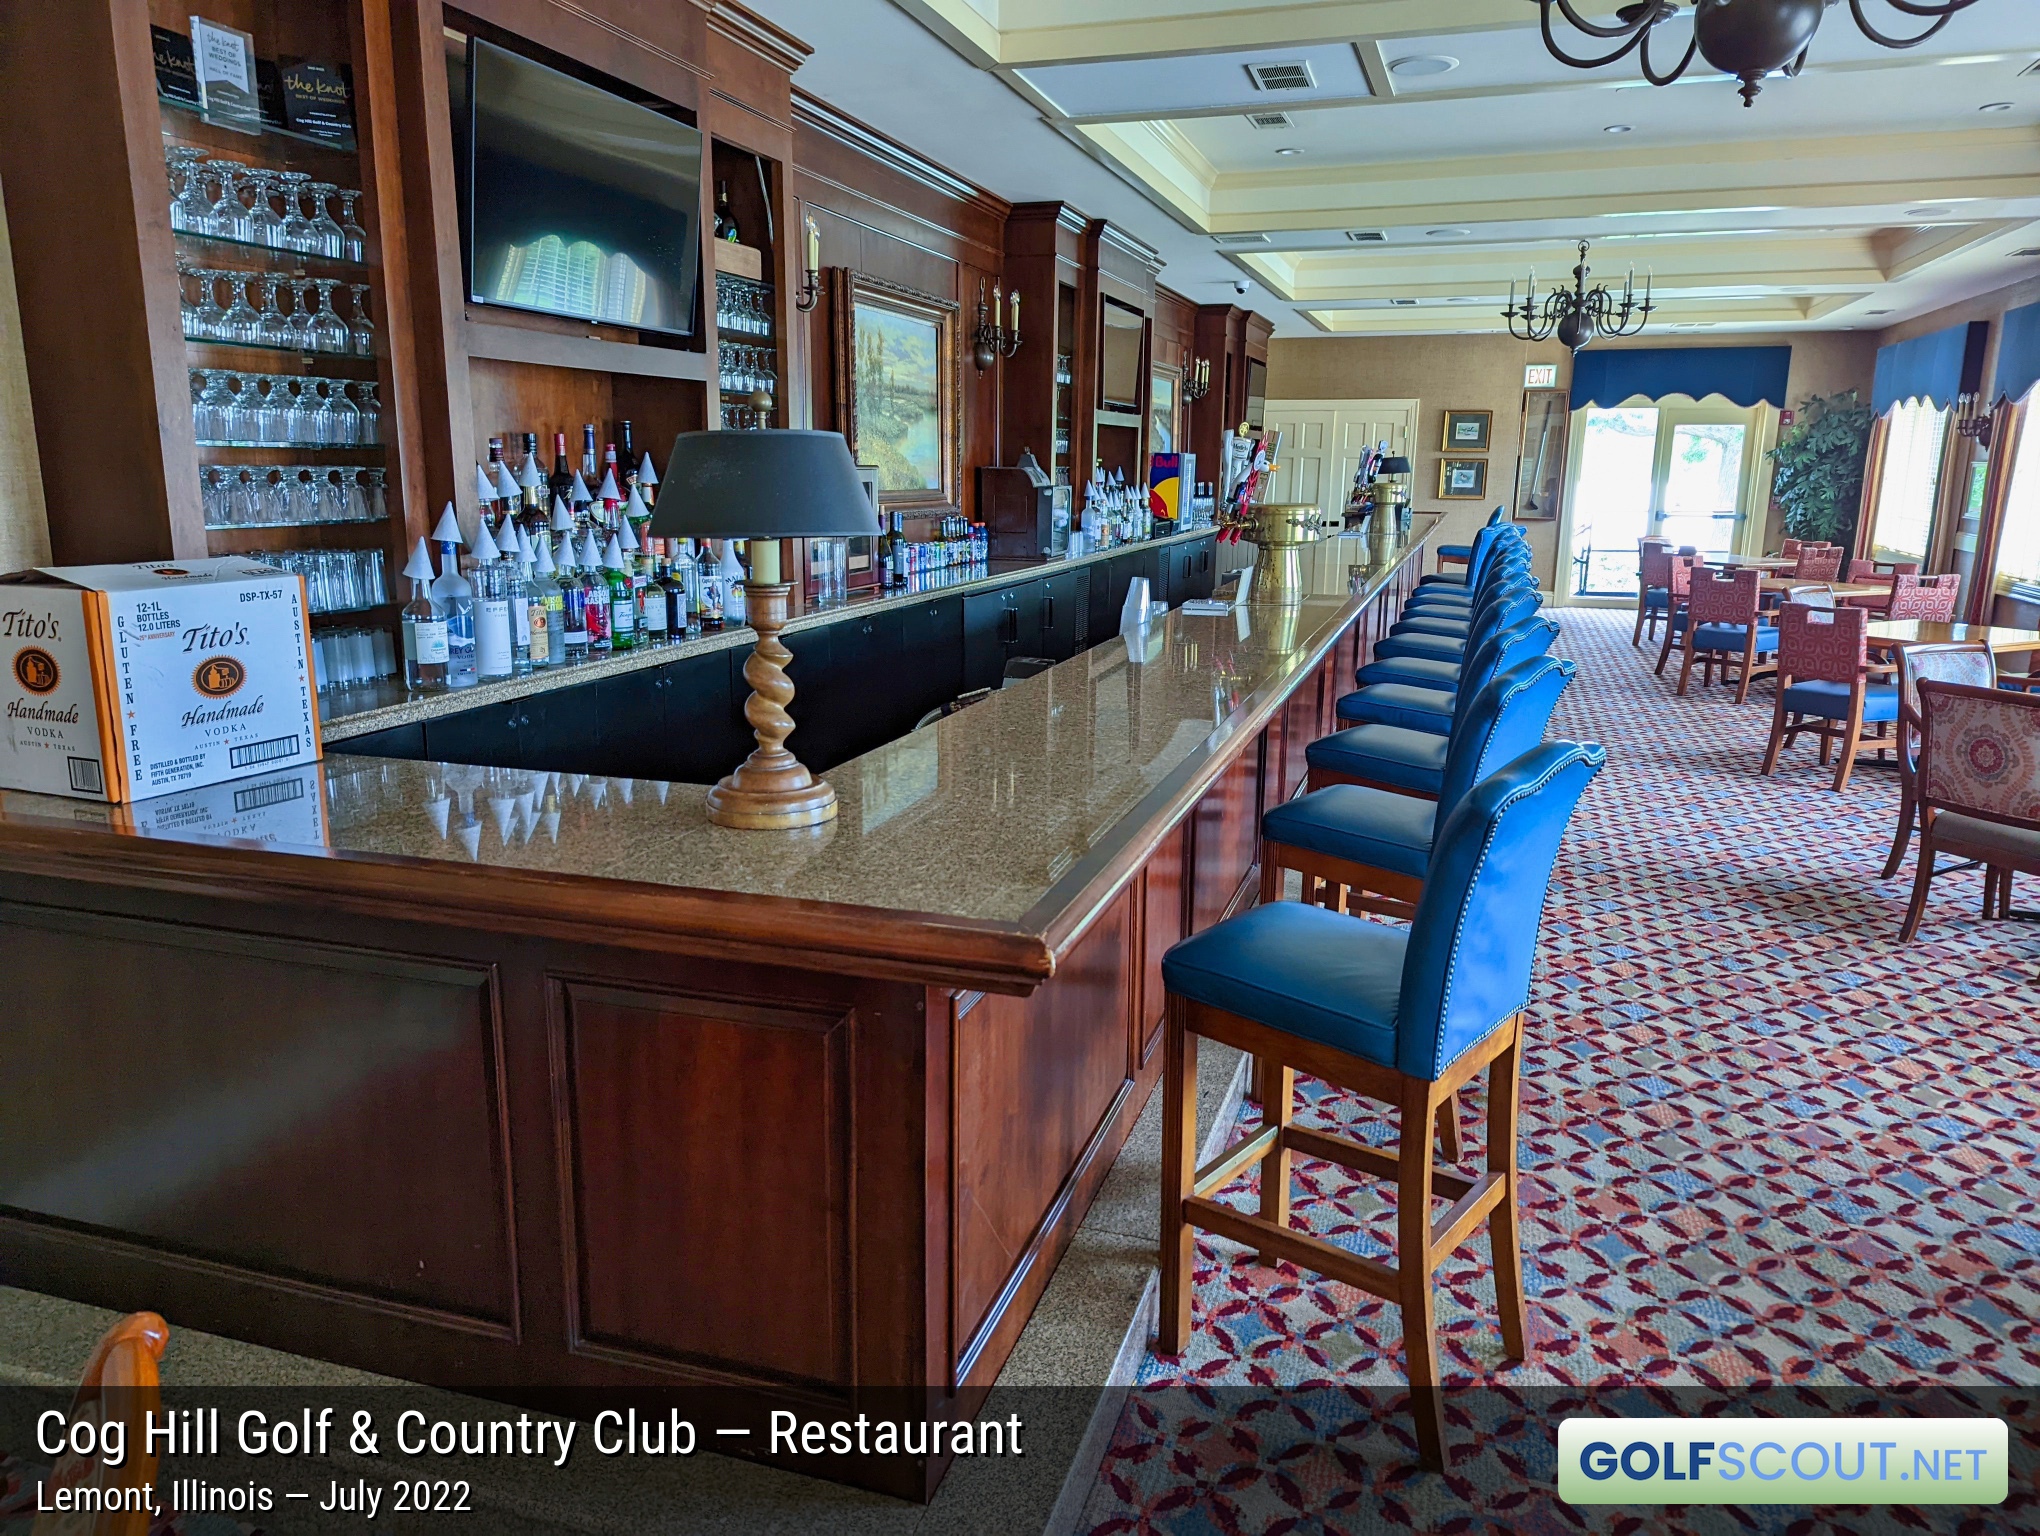 Photo of the restaurant at Cog Hill Course #3 in Lemont, Illinois. The bar in one of the many dining areas in the clubhouse.